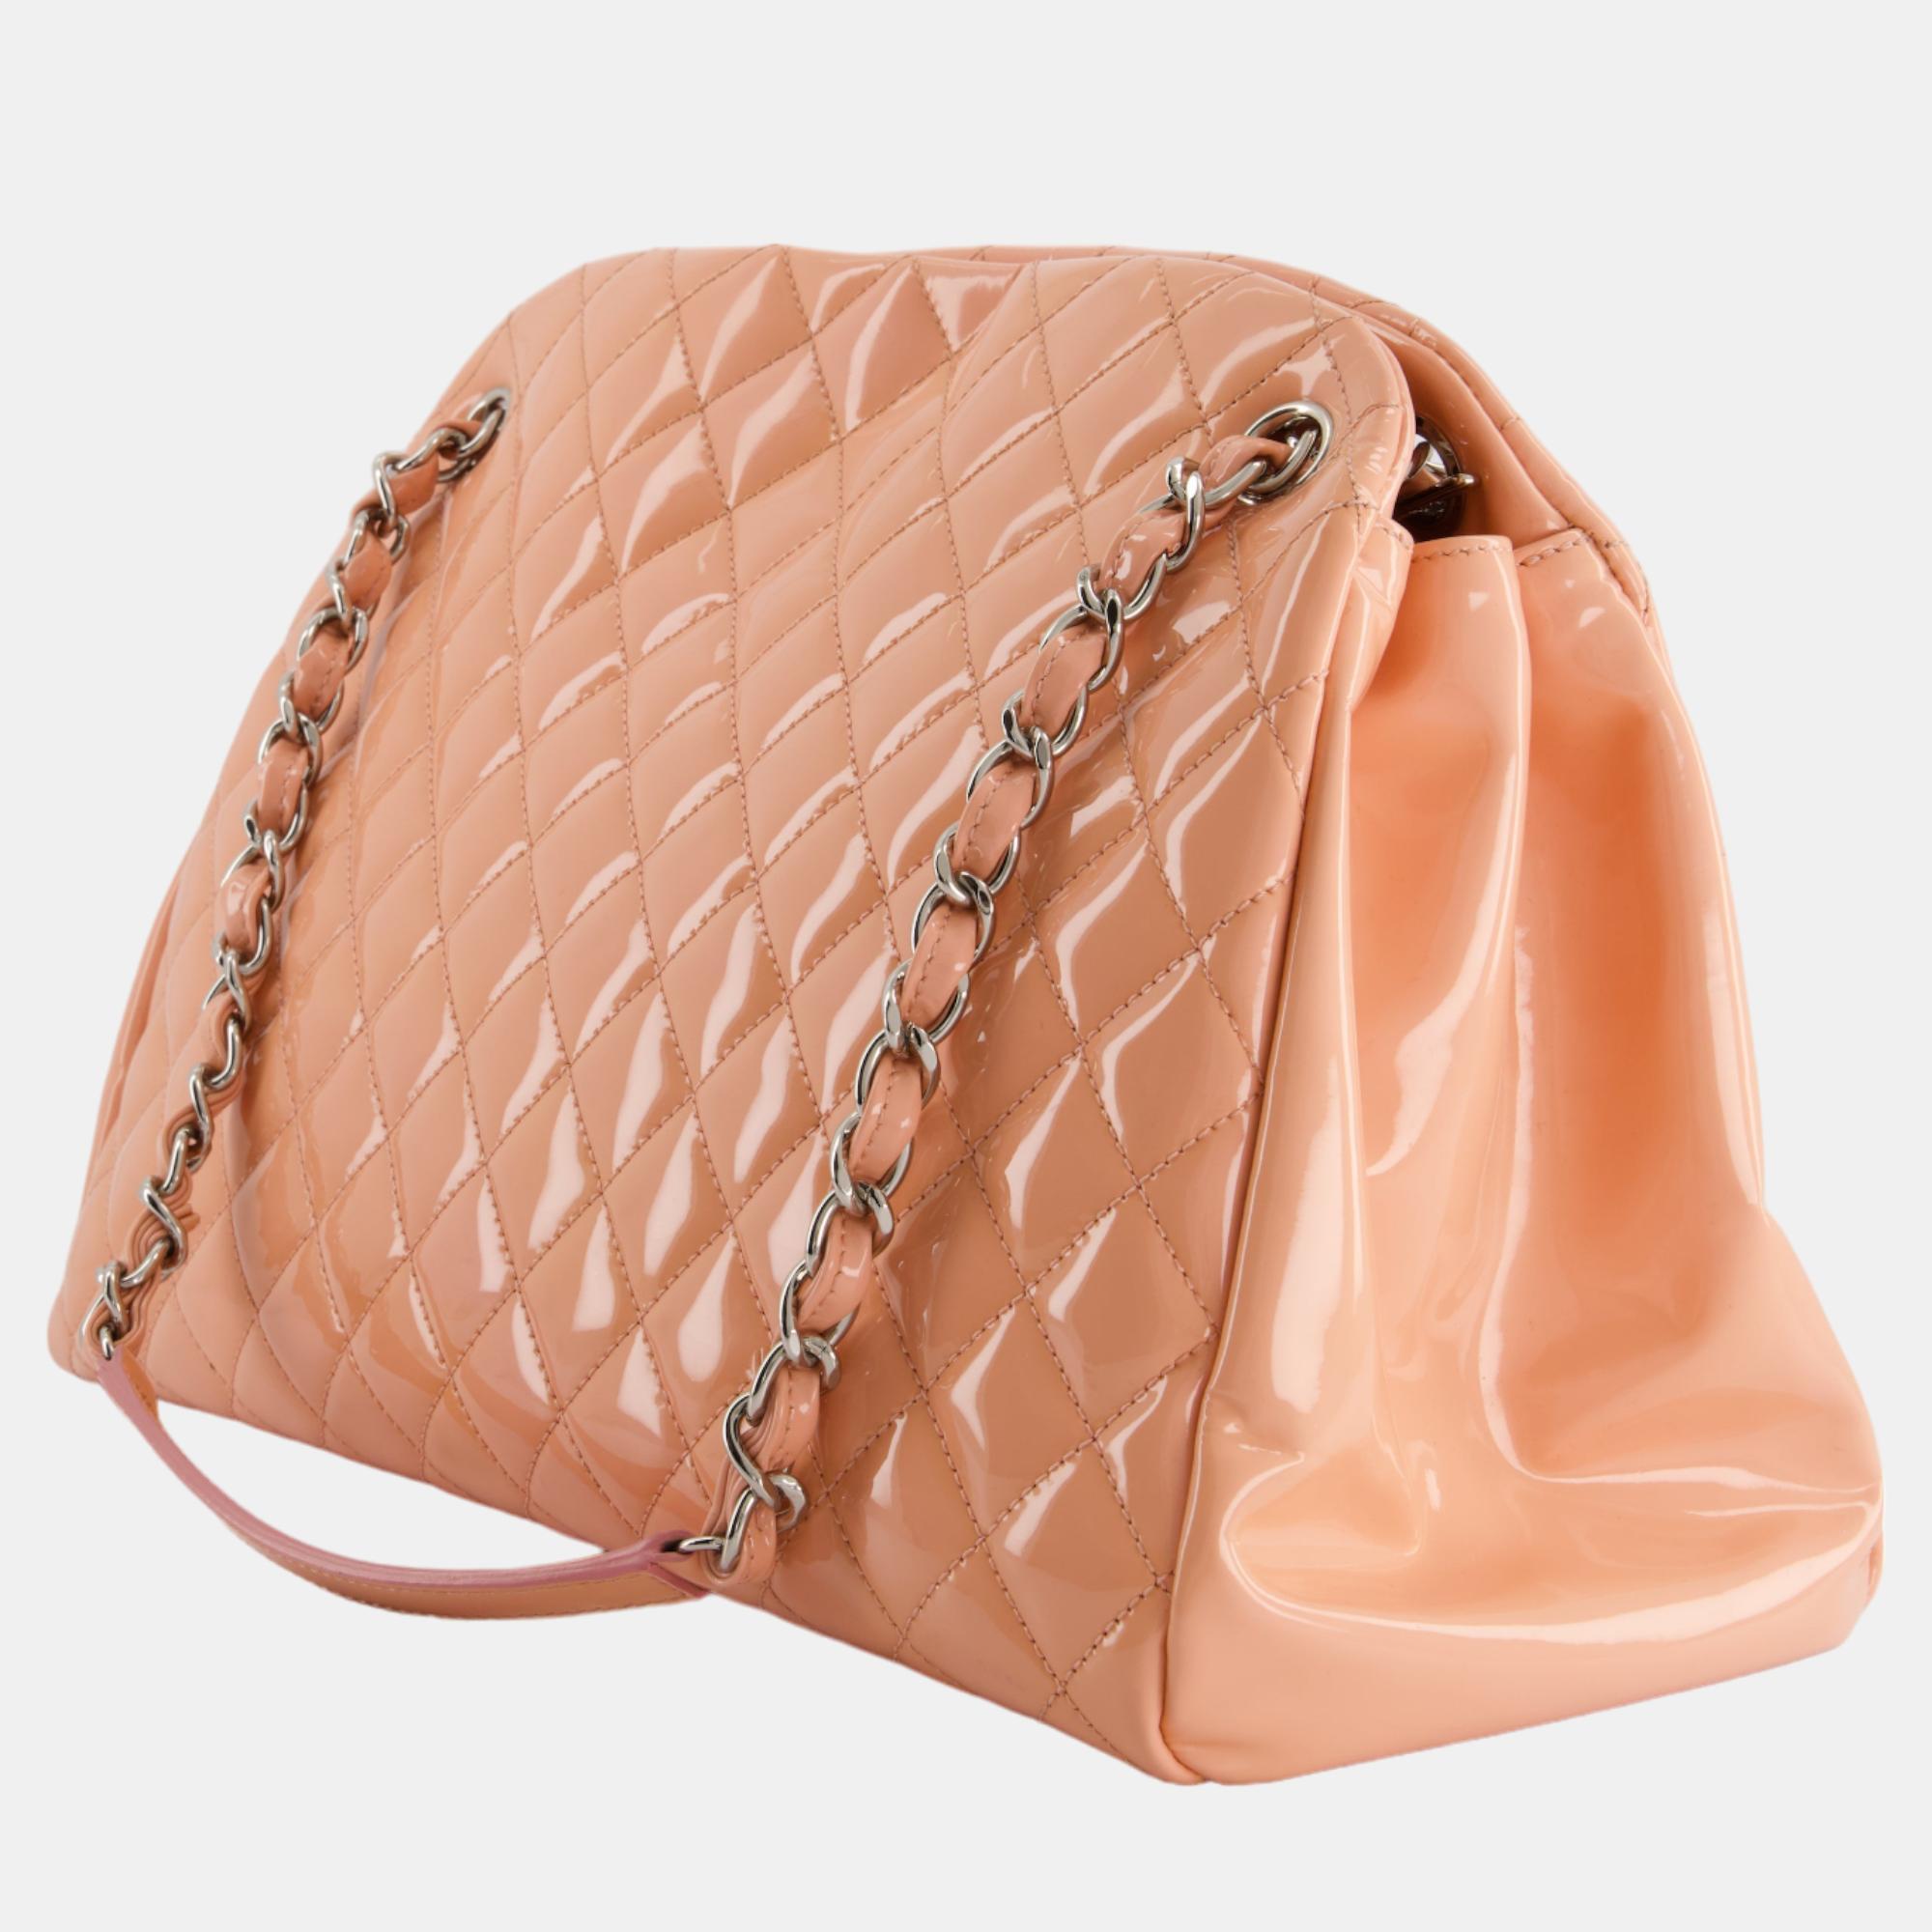 Chanel Pink Patent Mademoiselle Shoulder Bag With Silver Hardware